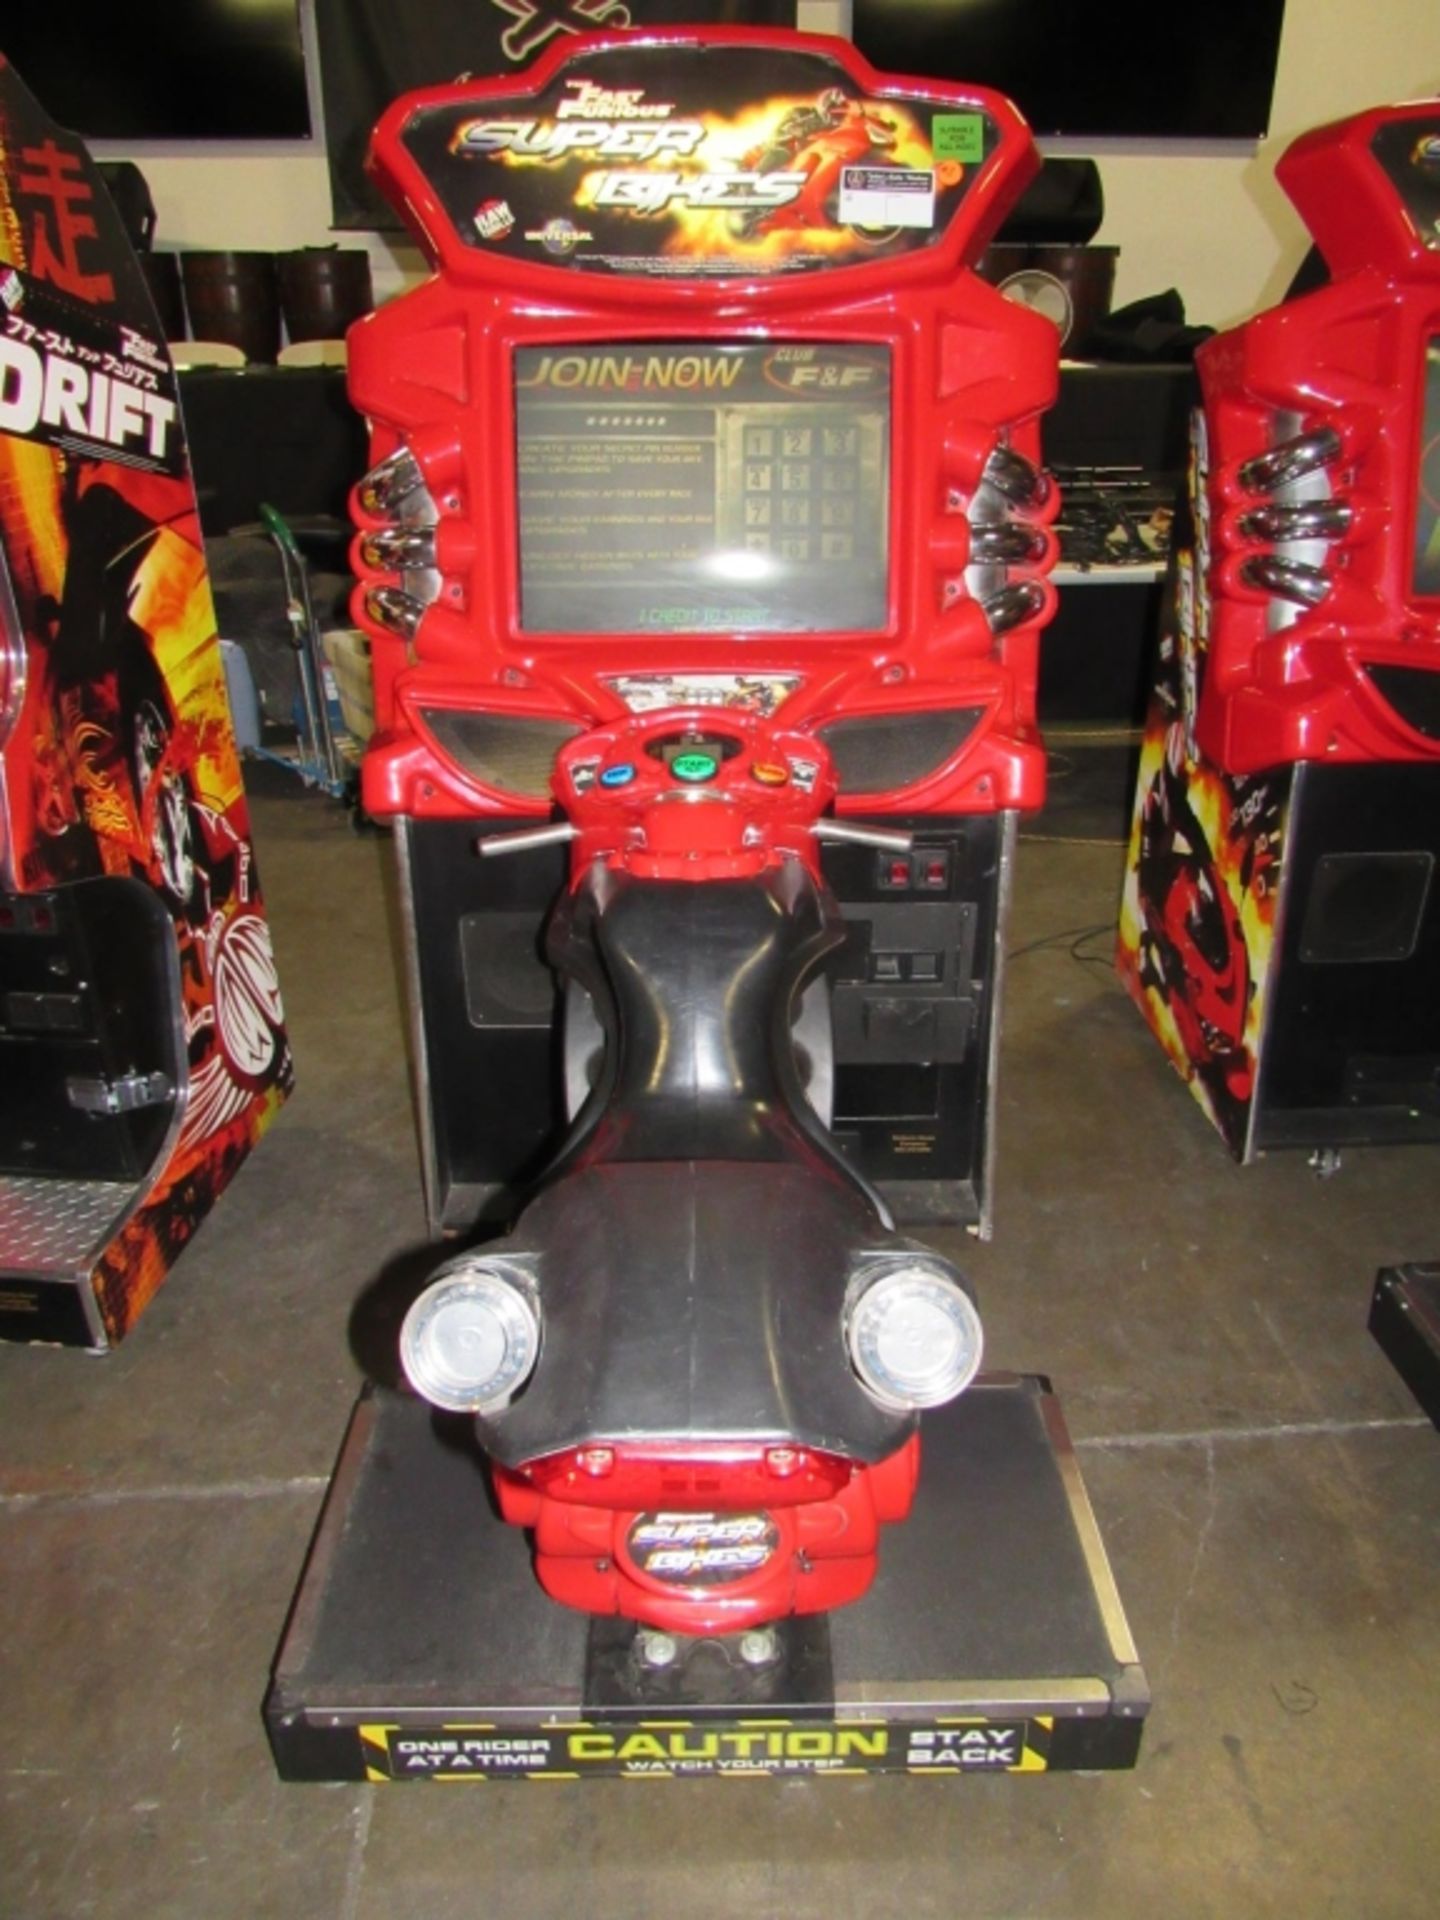 SUPER BIKES FAST & FURIOUS RED RACING ARCADE #2 - Image 3 of 7